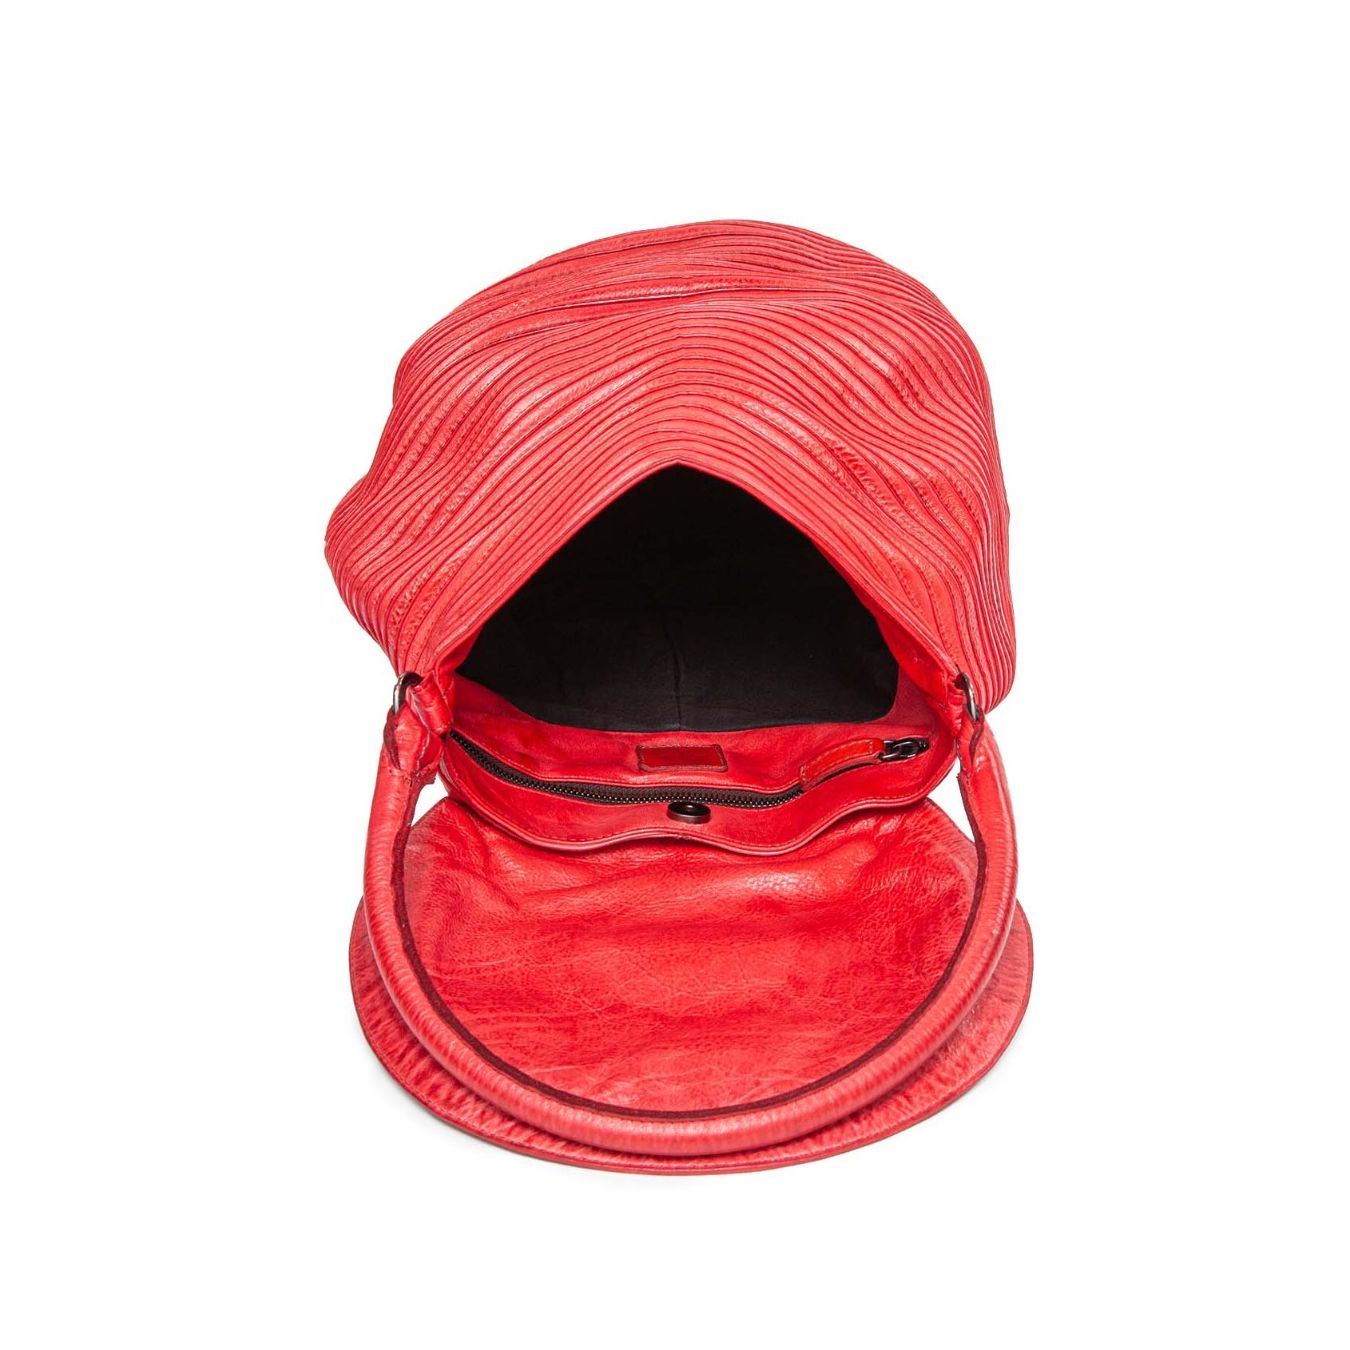 Sacca Patta Large Rosso Paprika